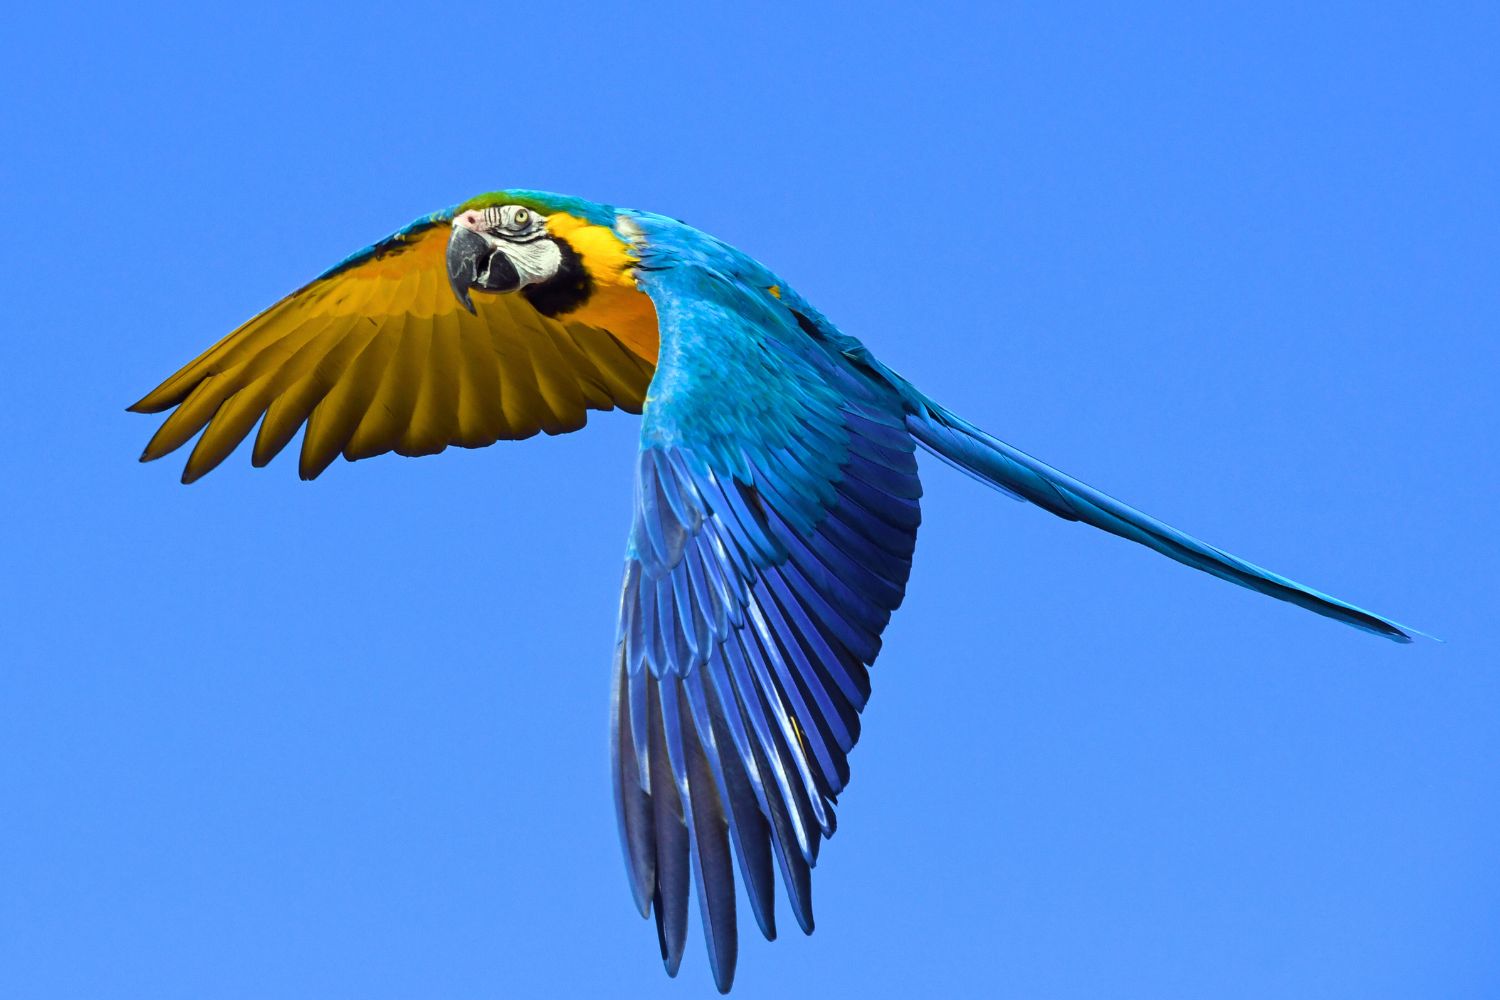 2. Macaws are the largest type of parrot